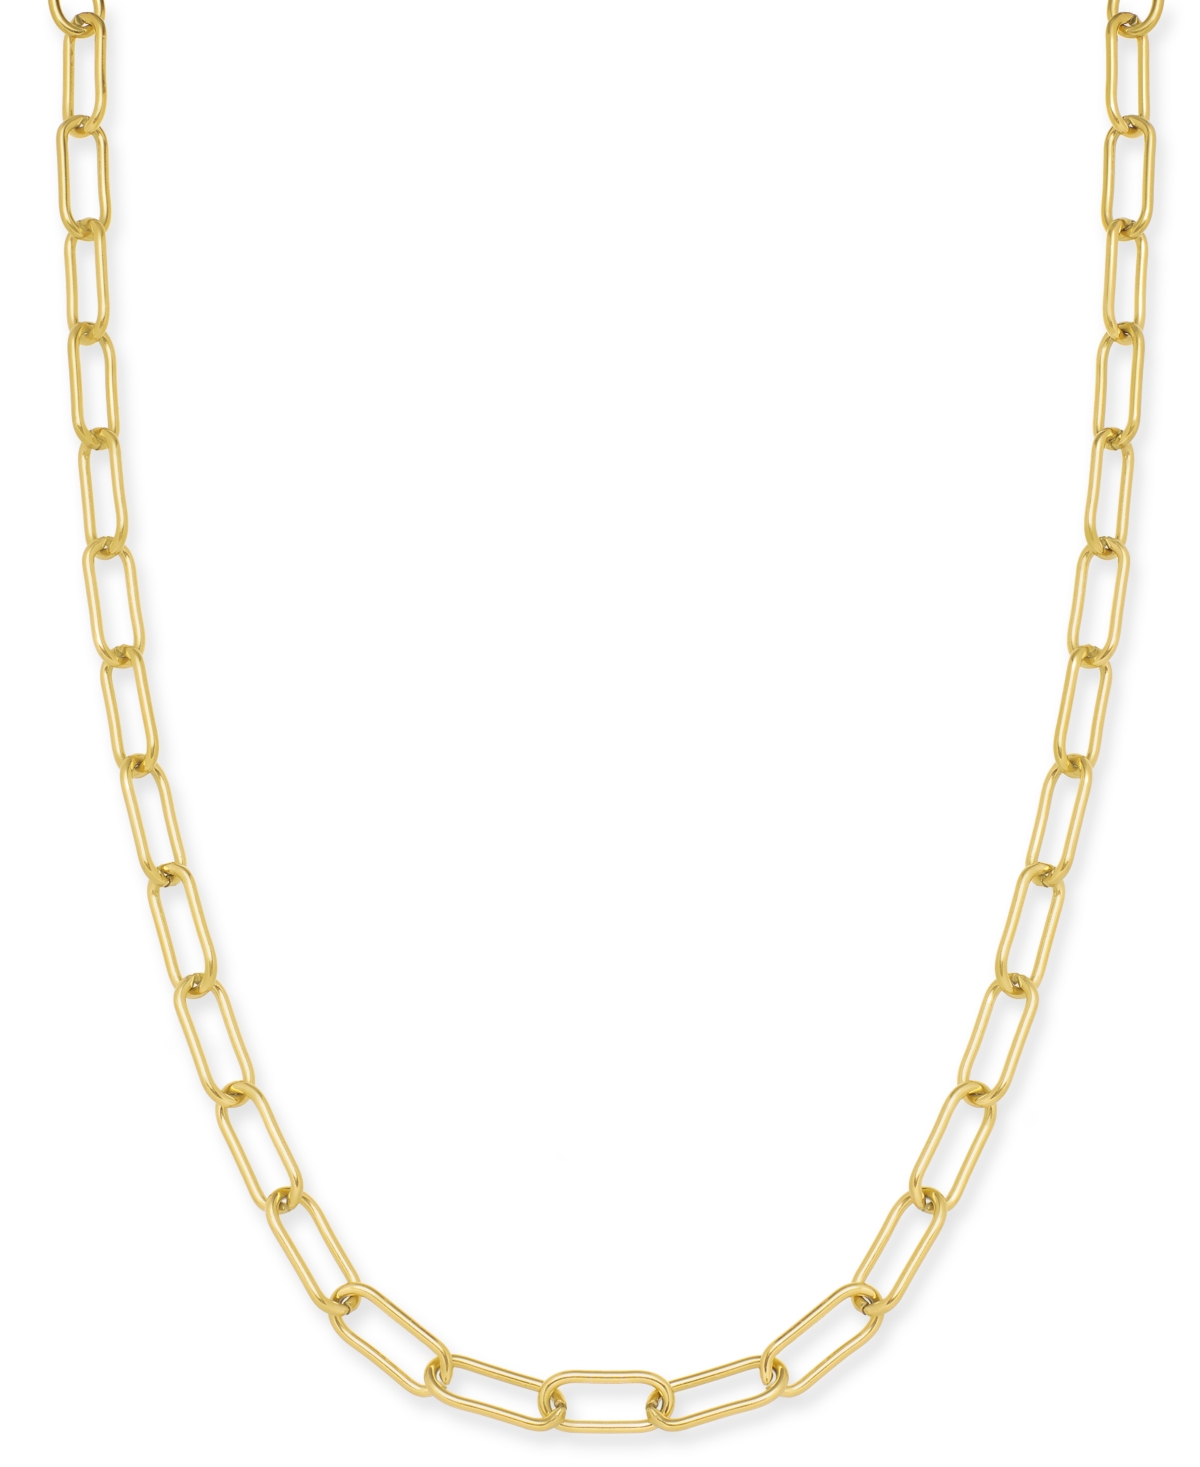 Lola Ade 18k Gold-plated Stainless Steel Paperclip Chain 18" Collar Necklace